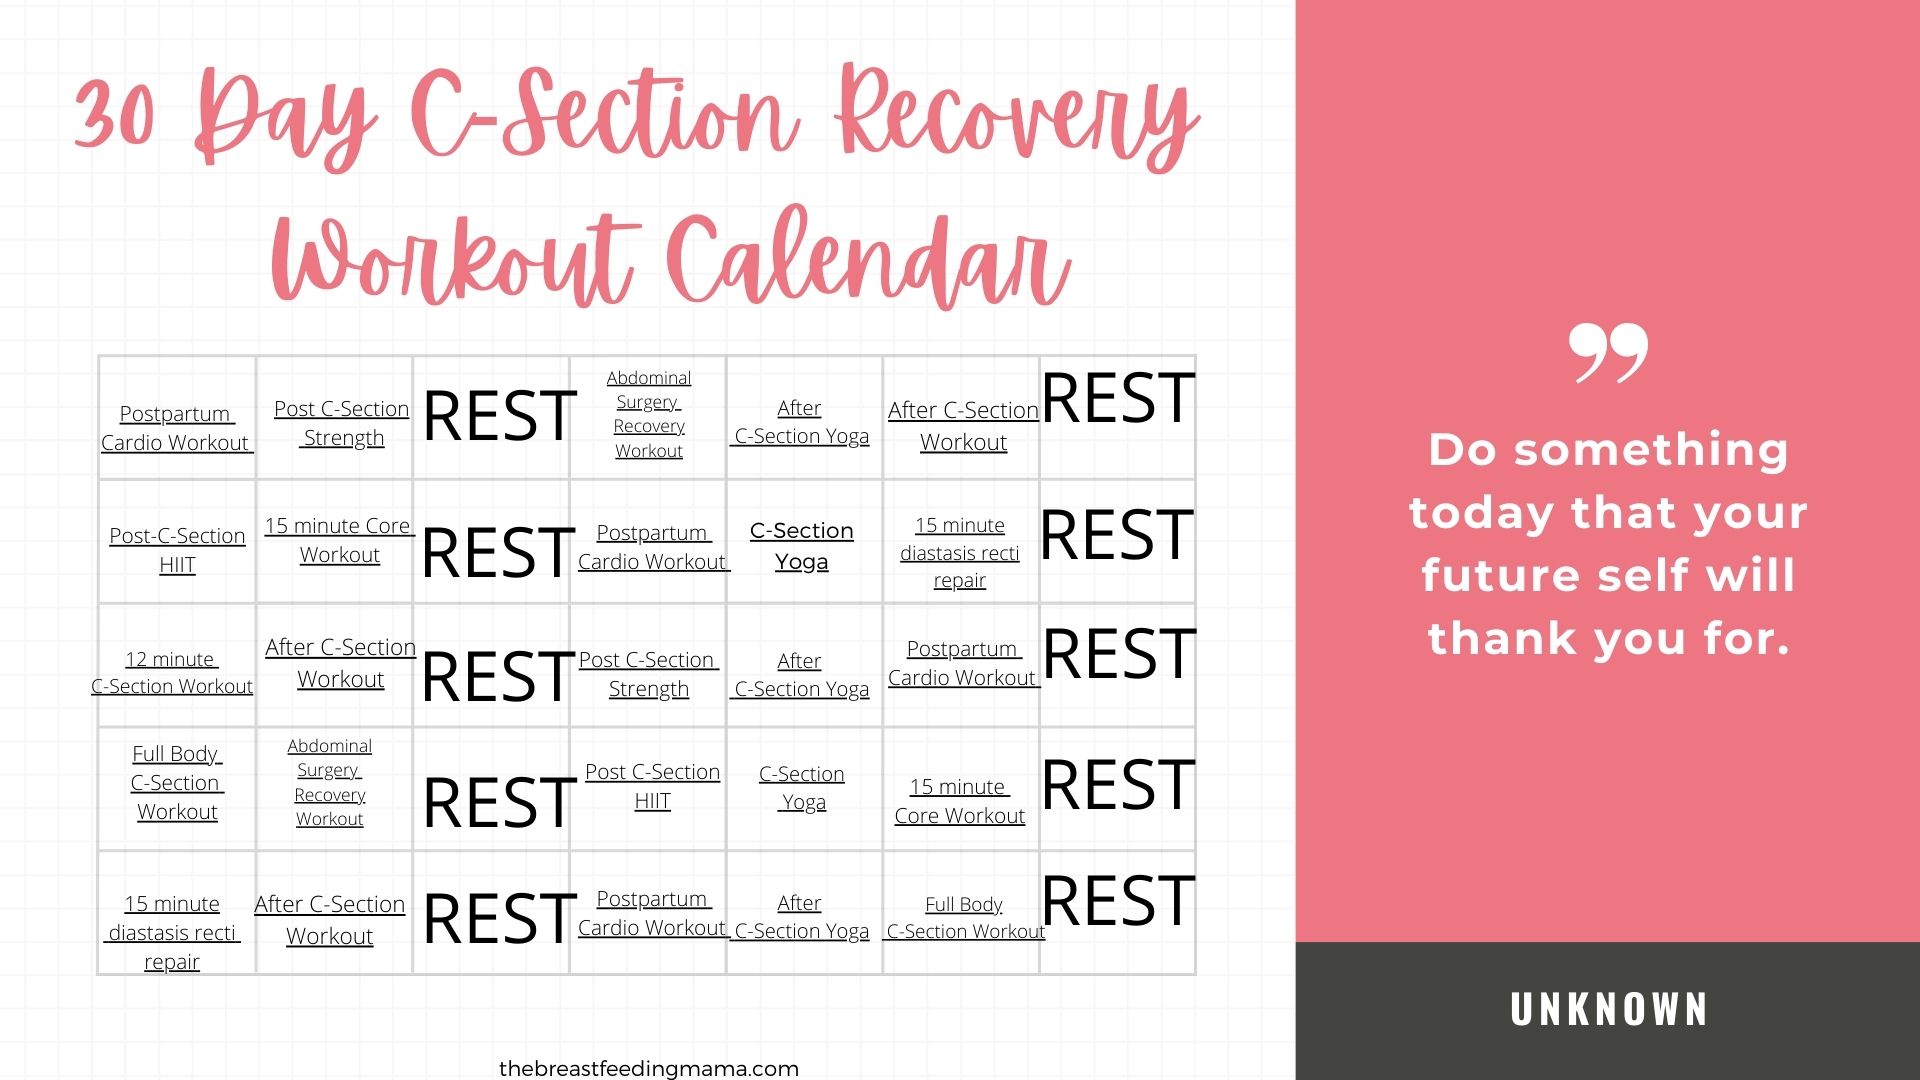 Free 30 Day C-Section Recovery Workout Plan - The Breastfeeding Mama